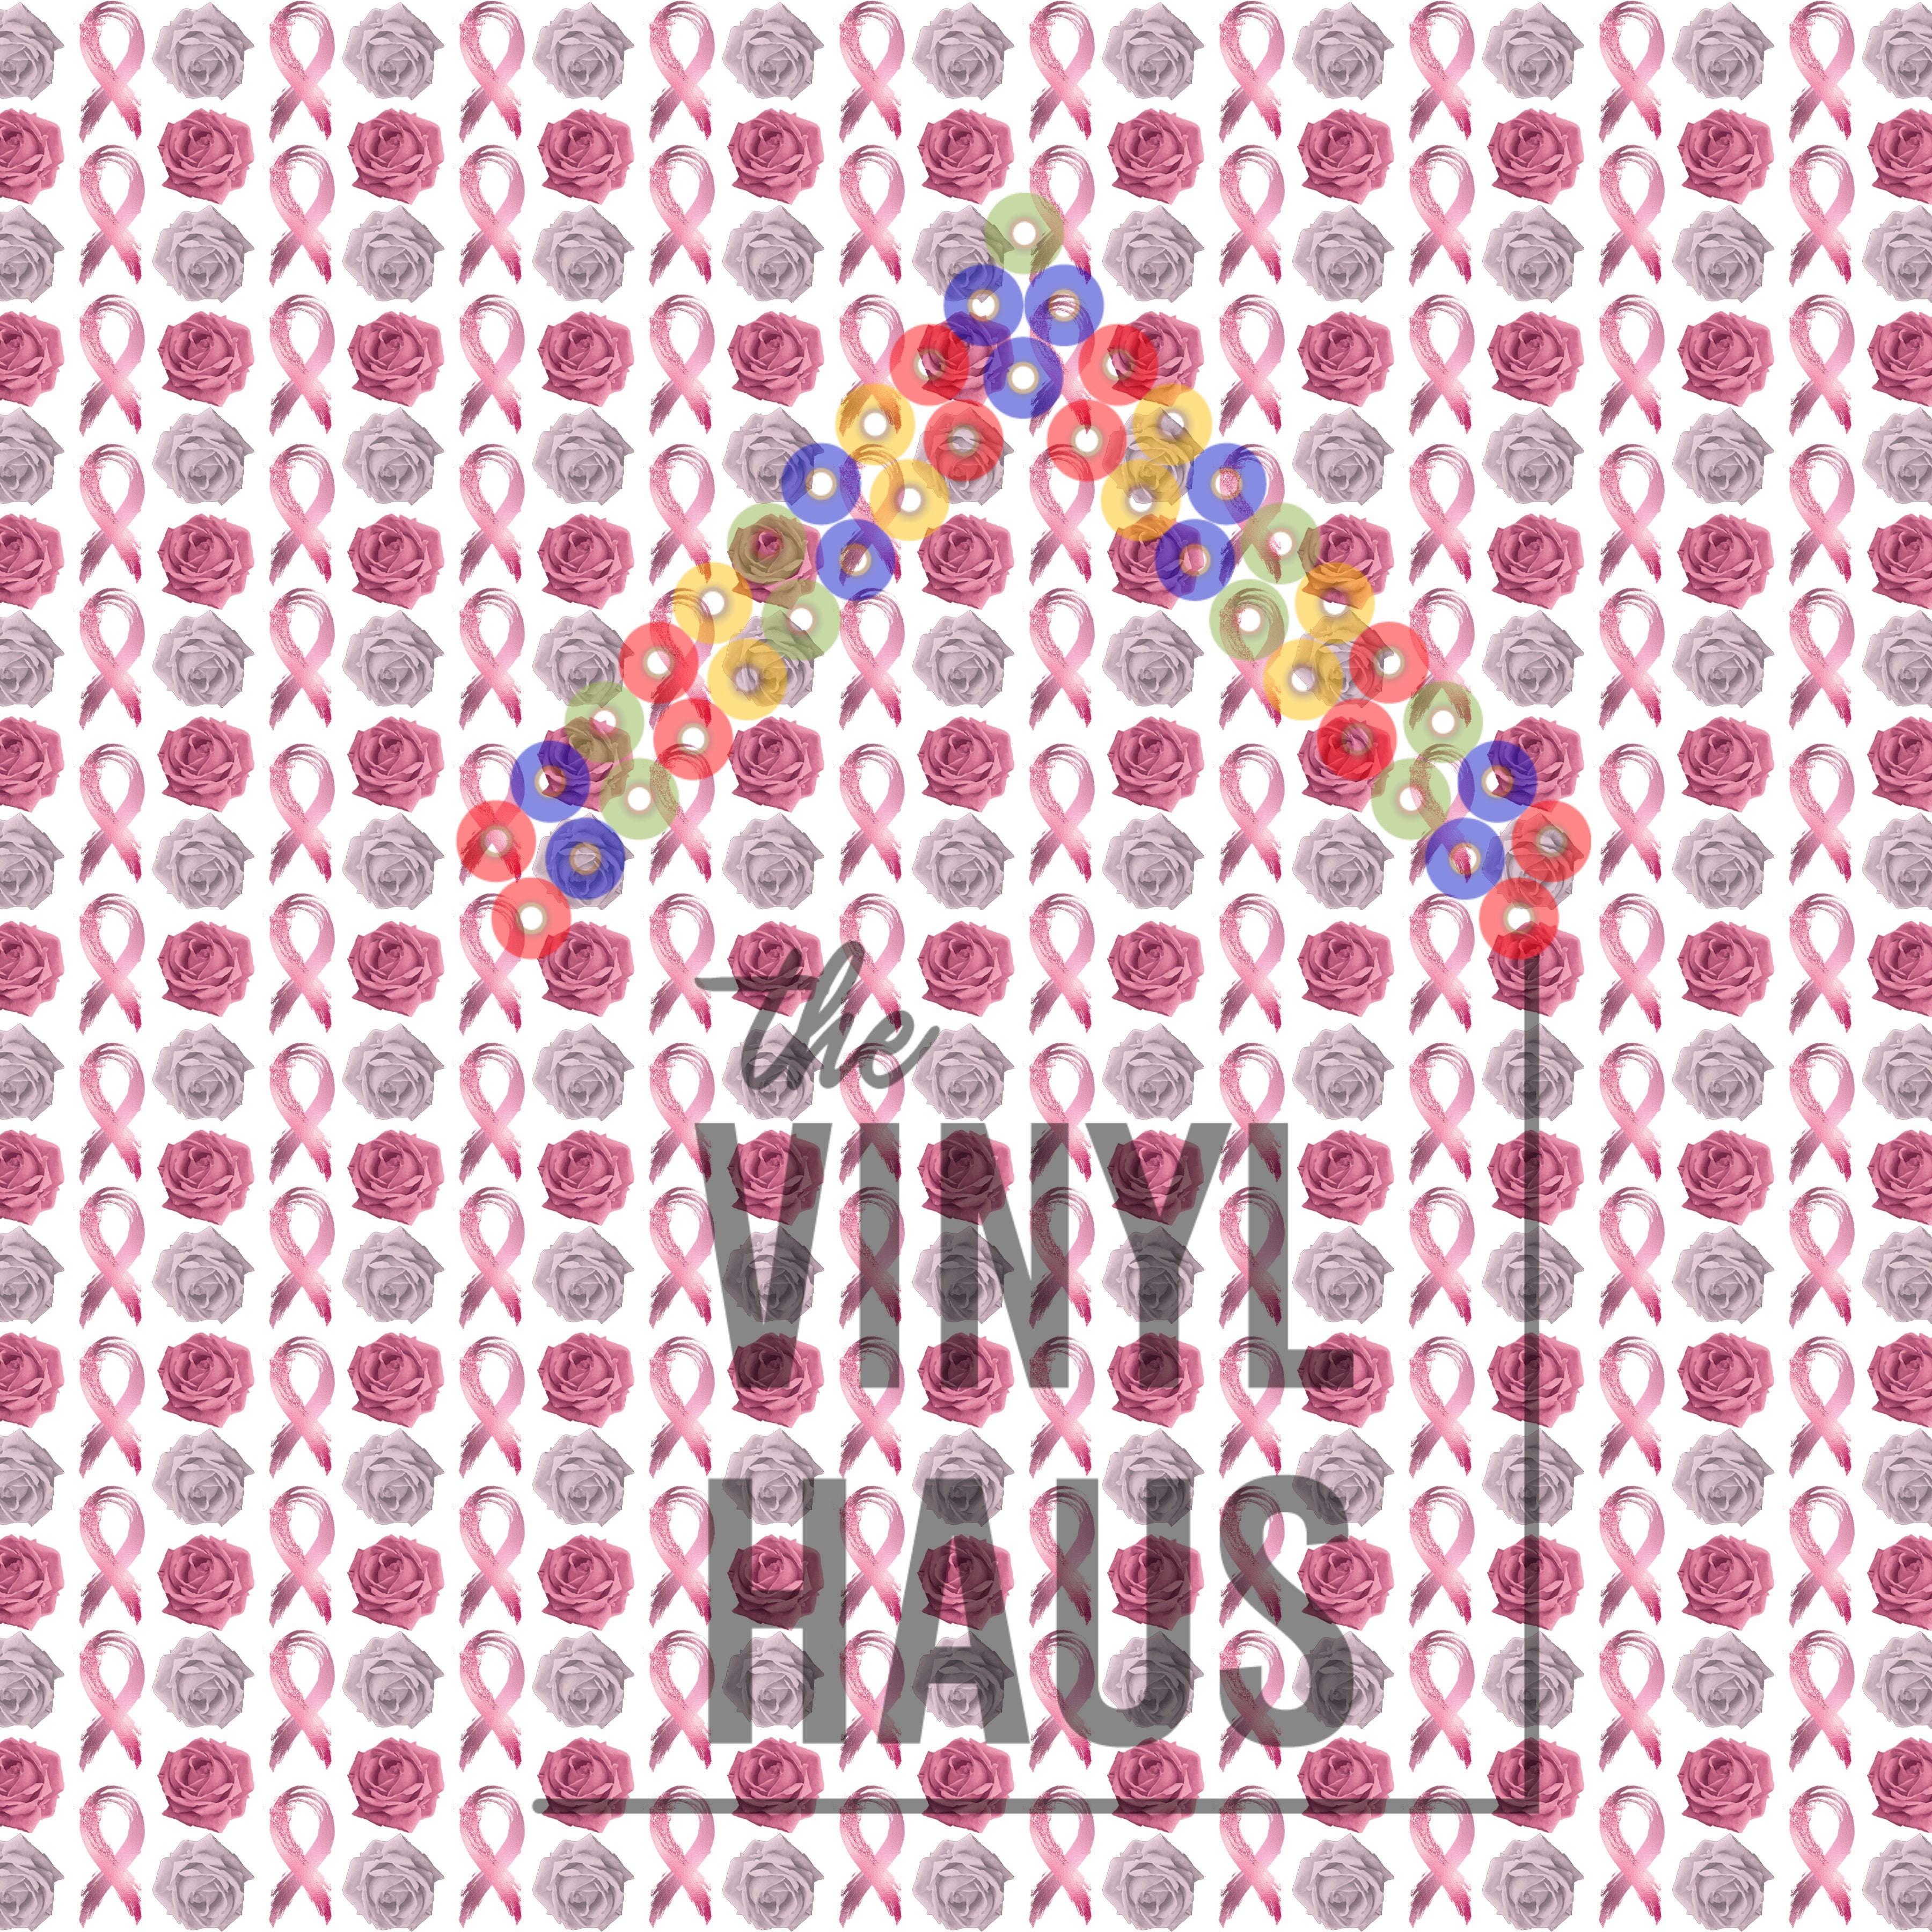 Breast Cancer Ribbons with Roses Pattern Vinyl 12" x 12" - The Vinyl Haus